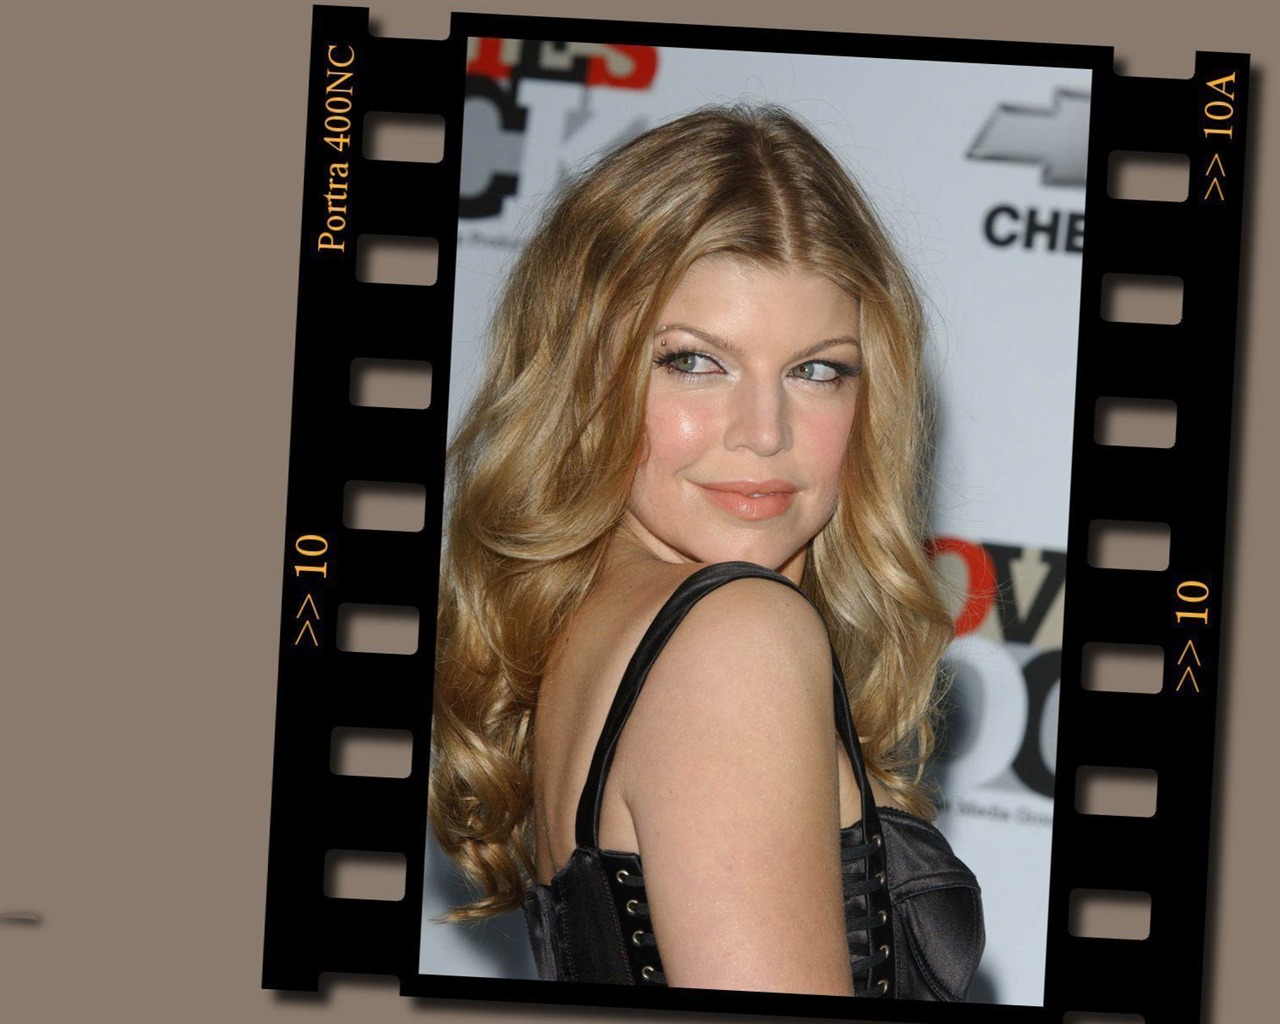 Fergie #006 - 1280x1024 Wallpapers Pictures Photos Images